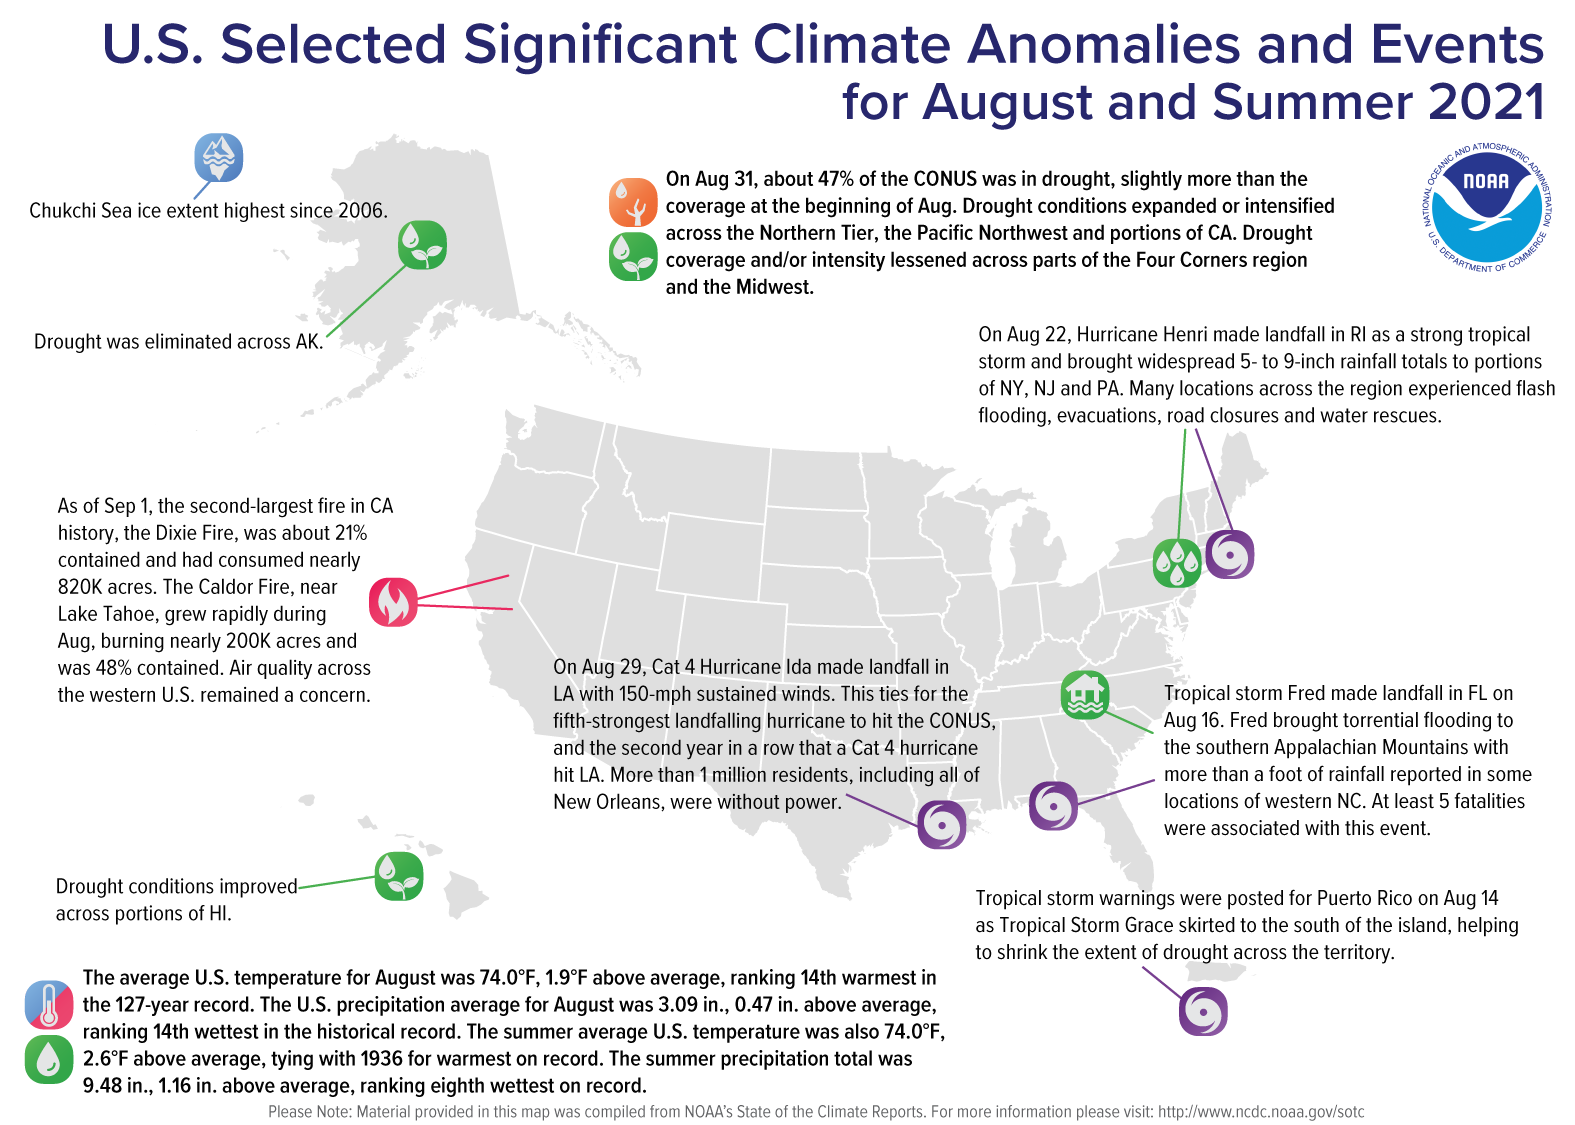 A map of the United States plotted with significant climate events that occurred during August and Summer 2021.